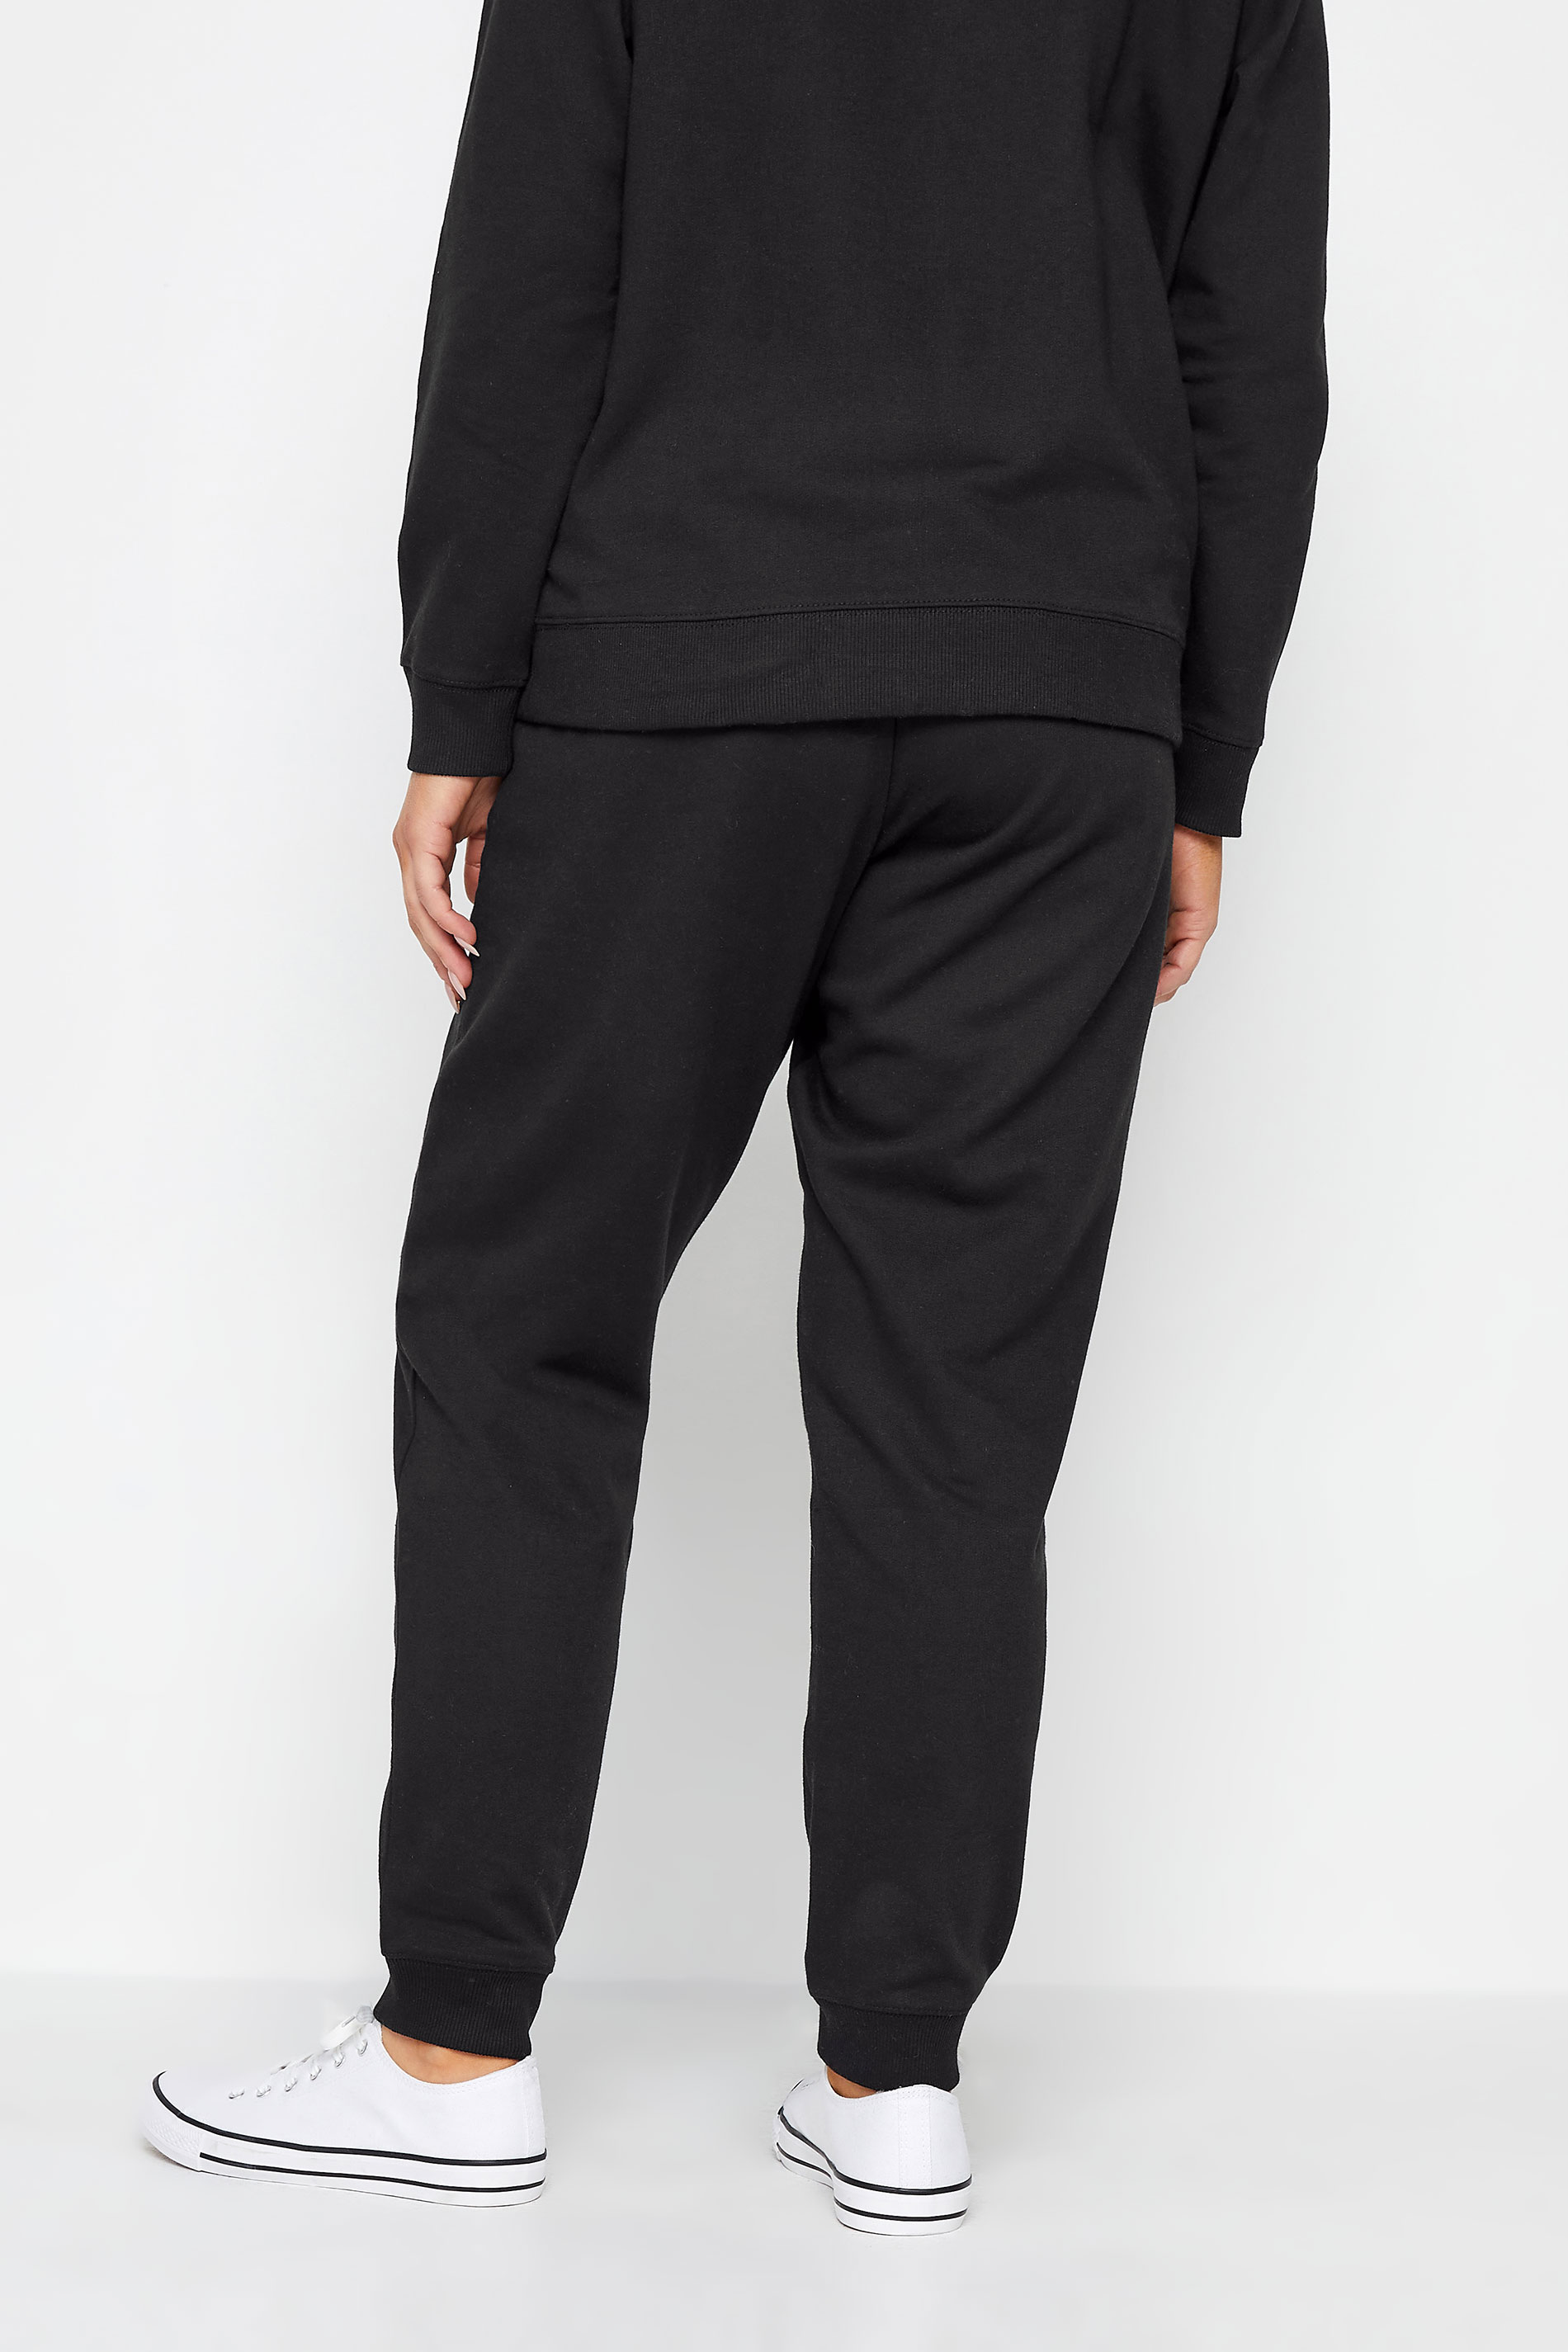 M&Co Black Essential Soft Touch Lounge Joggers | M&Co 3